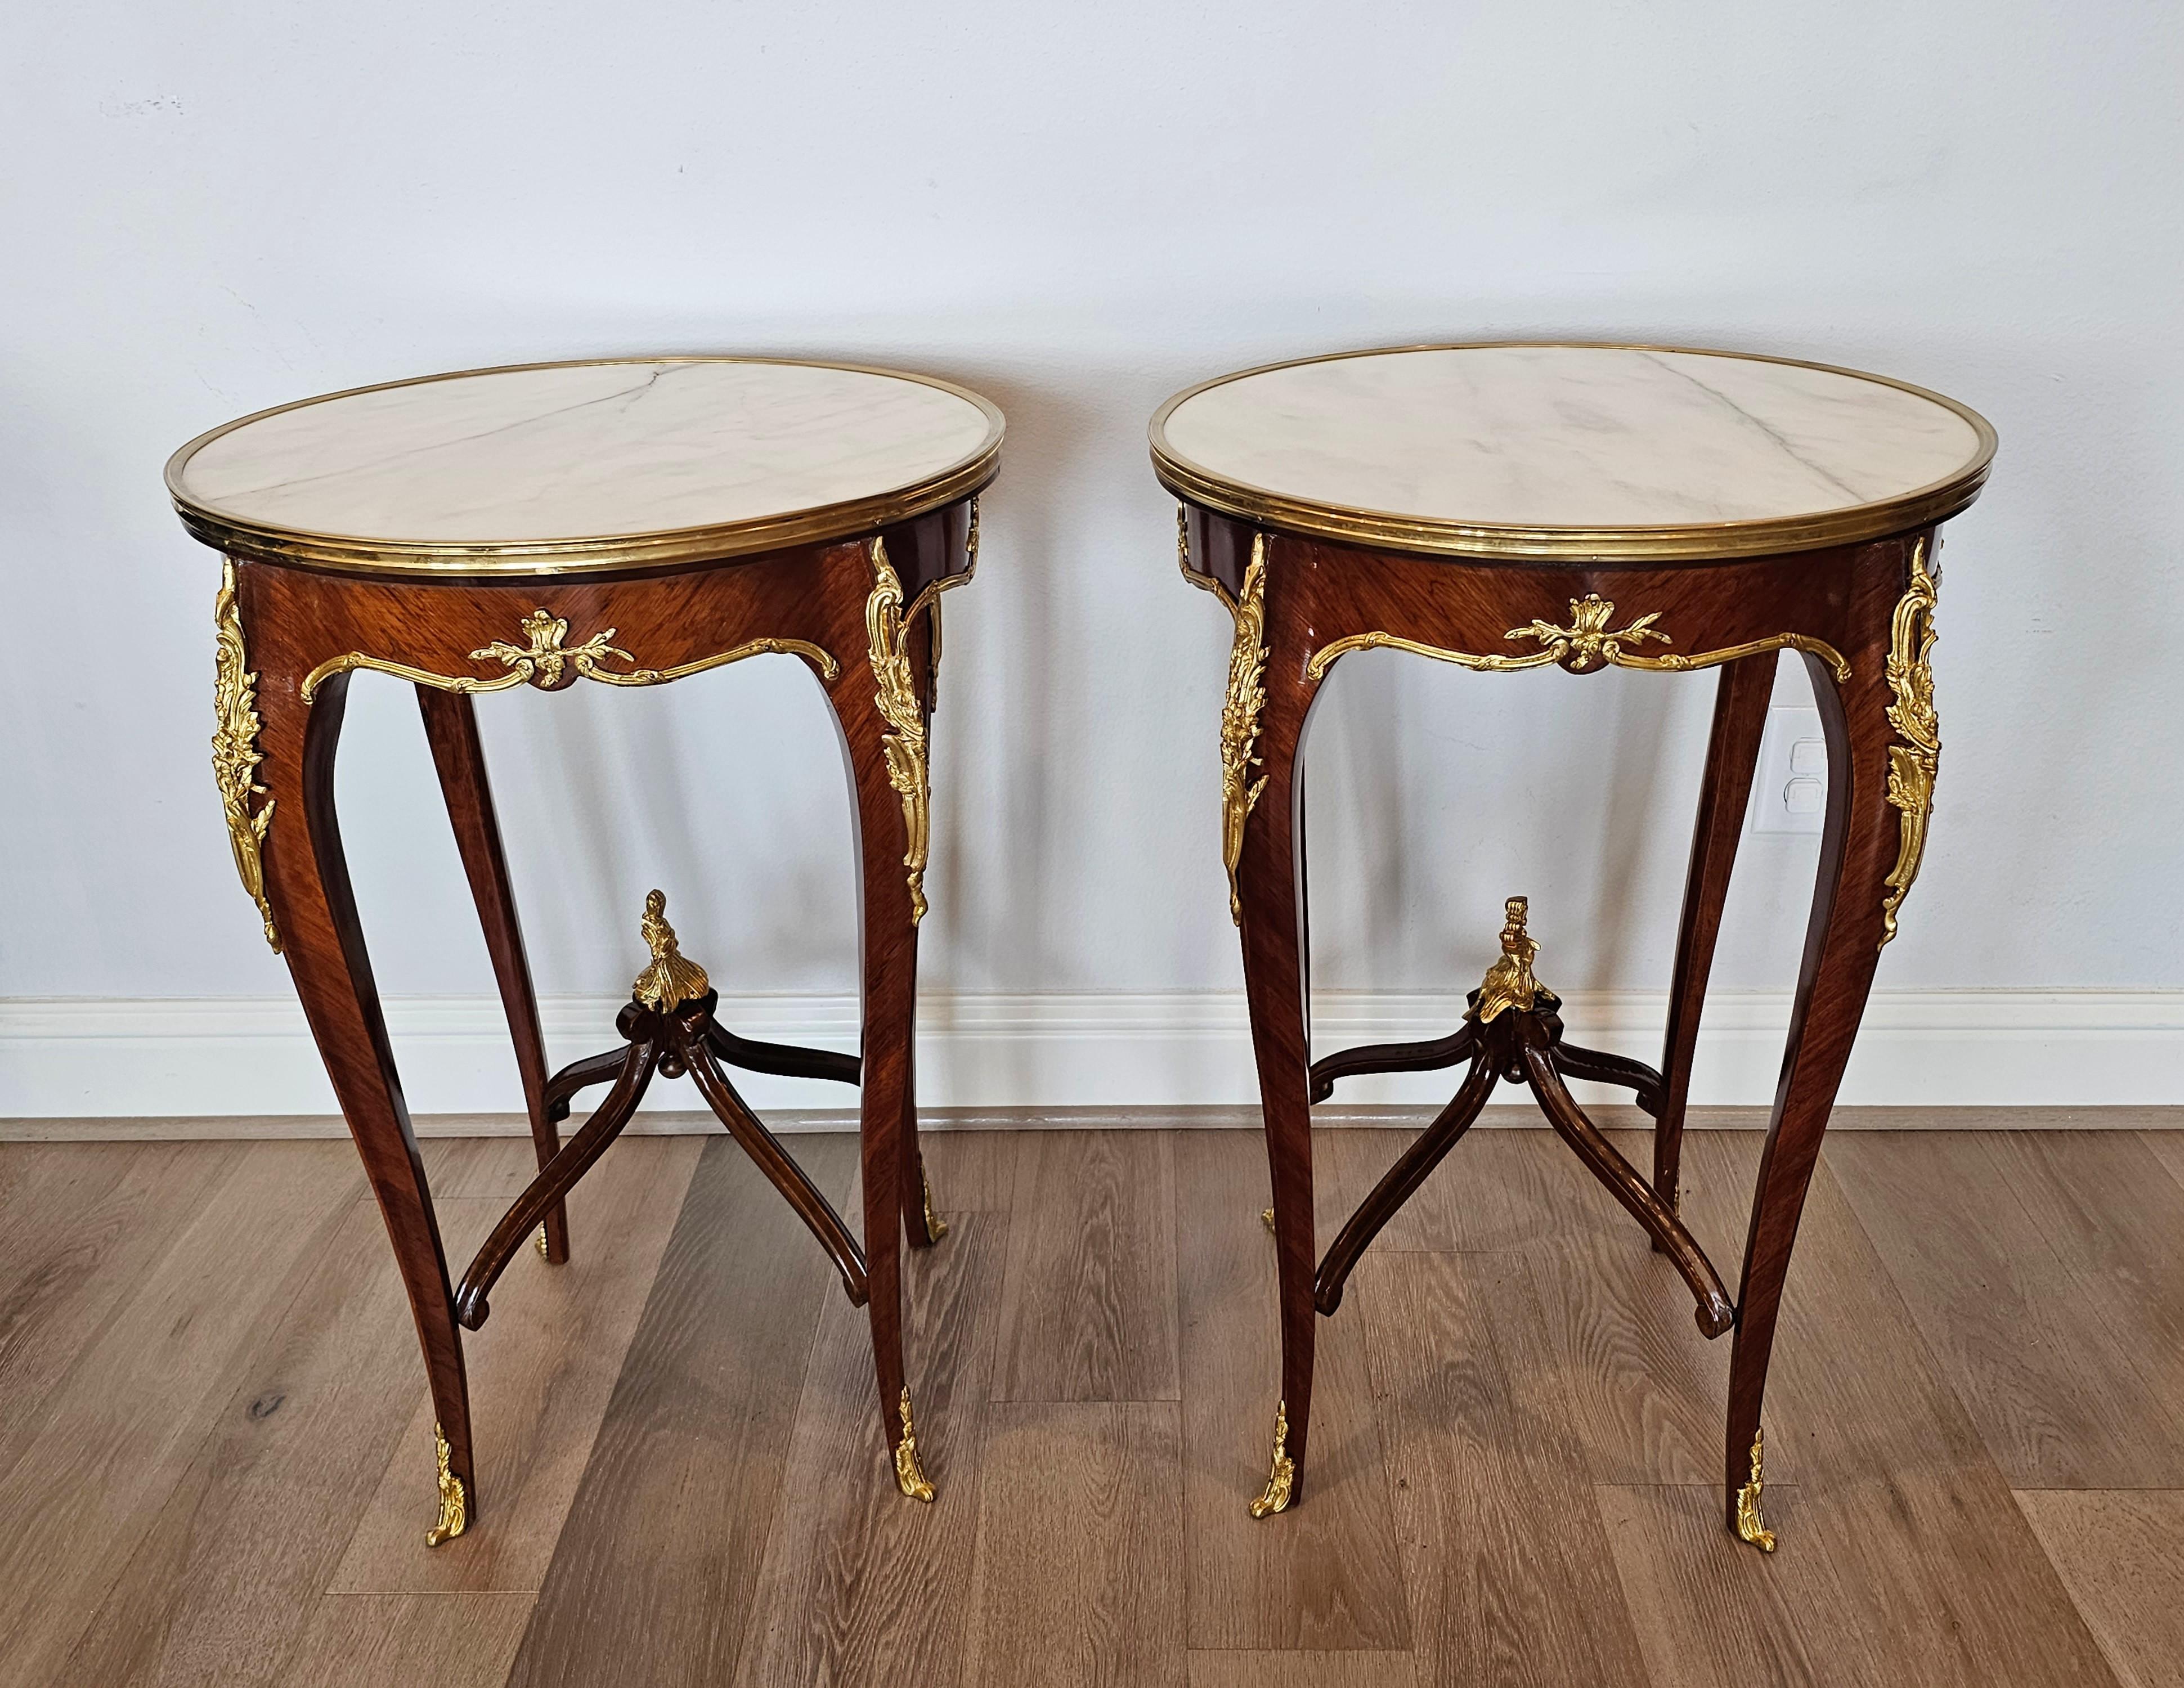 Pair of French Louis XV Style Gilt Bronze Mounted Kingwood Side Tables For Sale 1